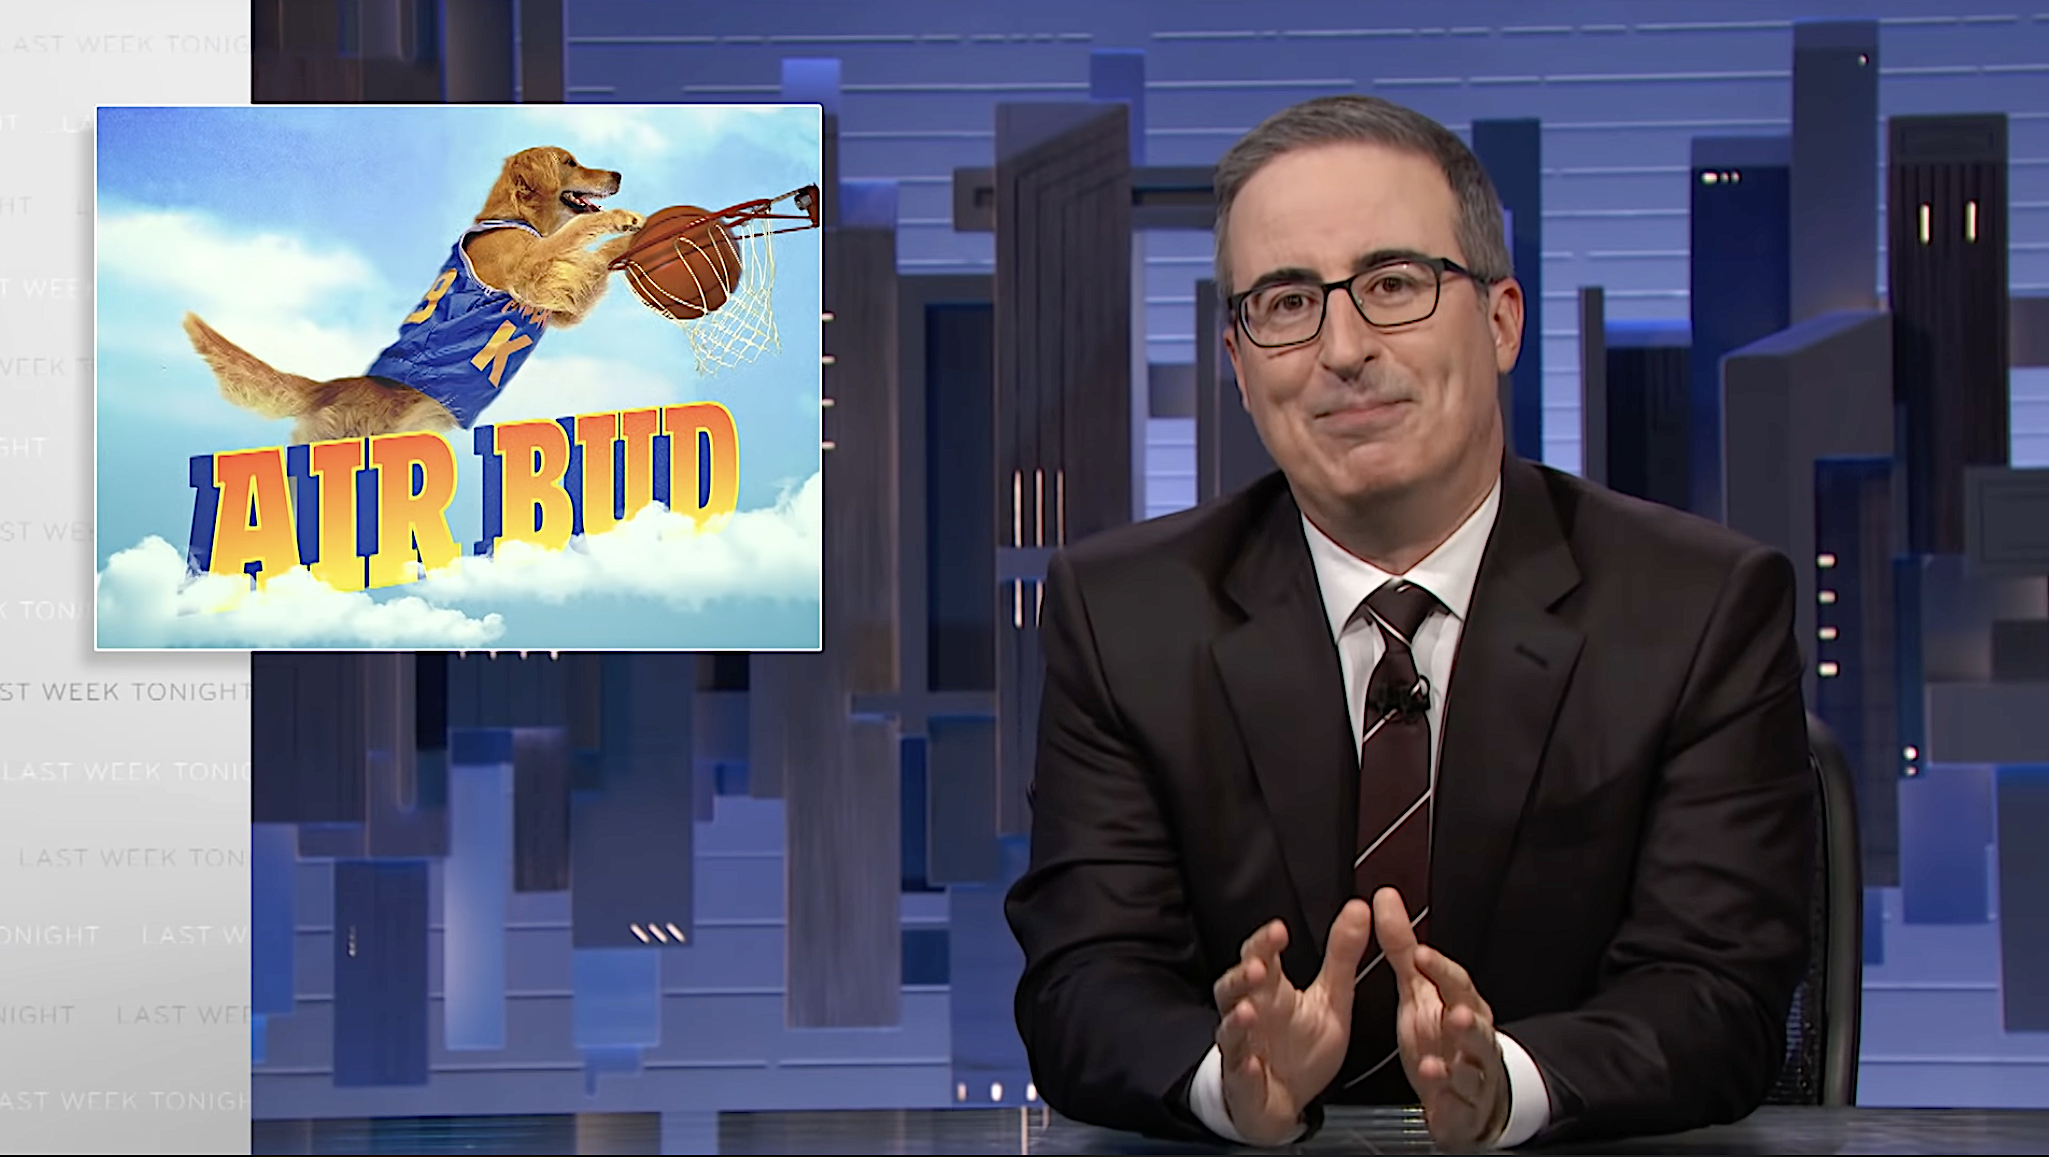 John Oliver dissects Air Bud